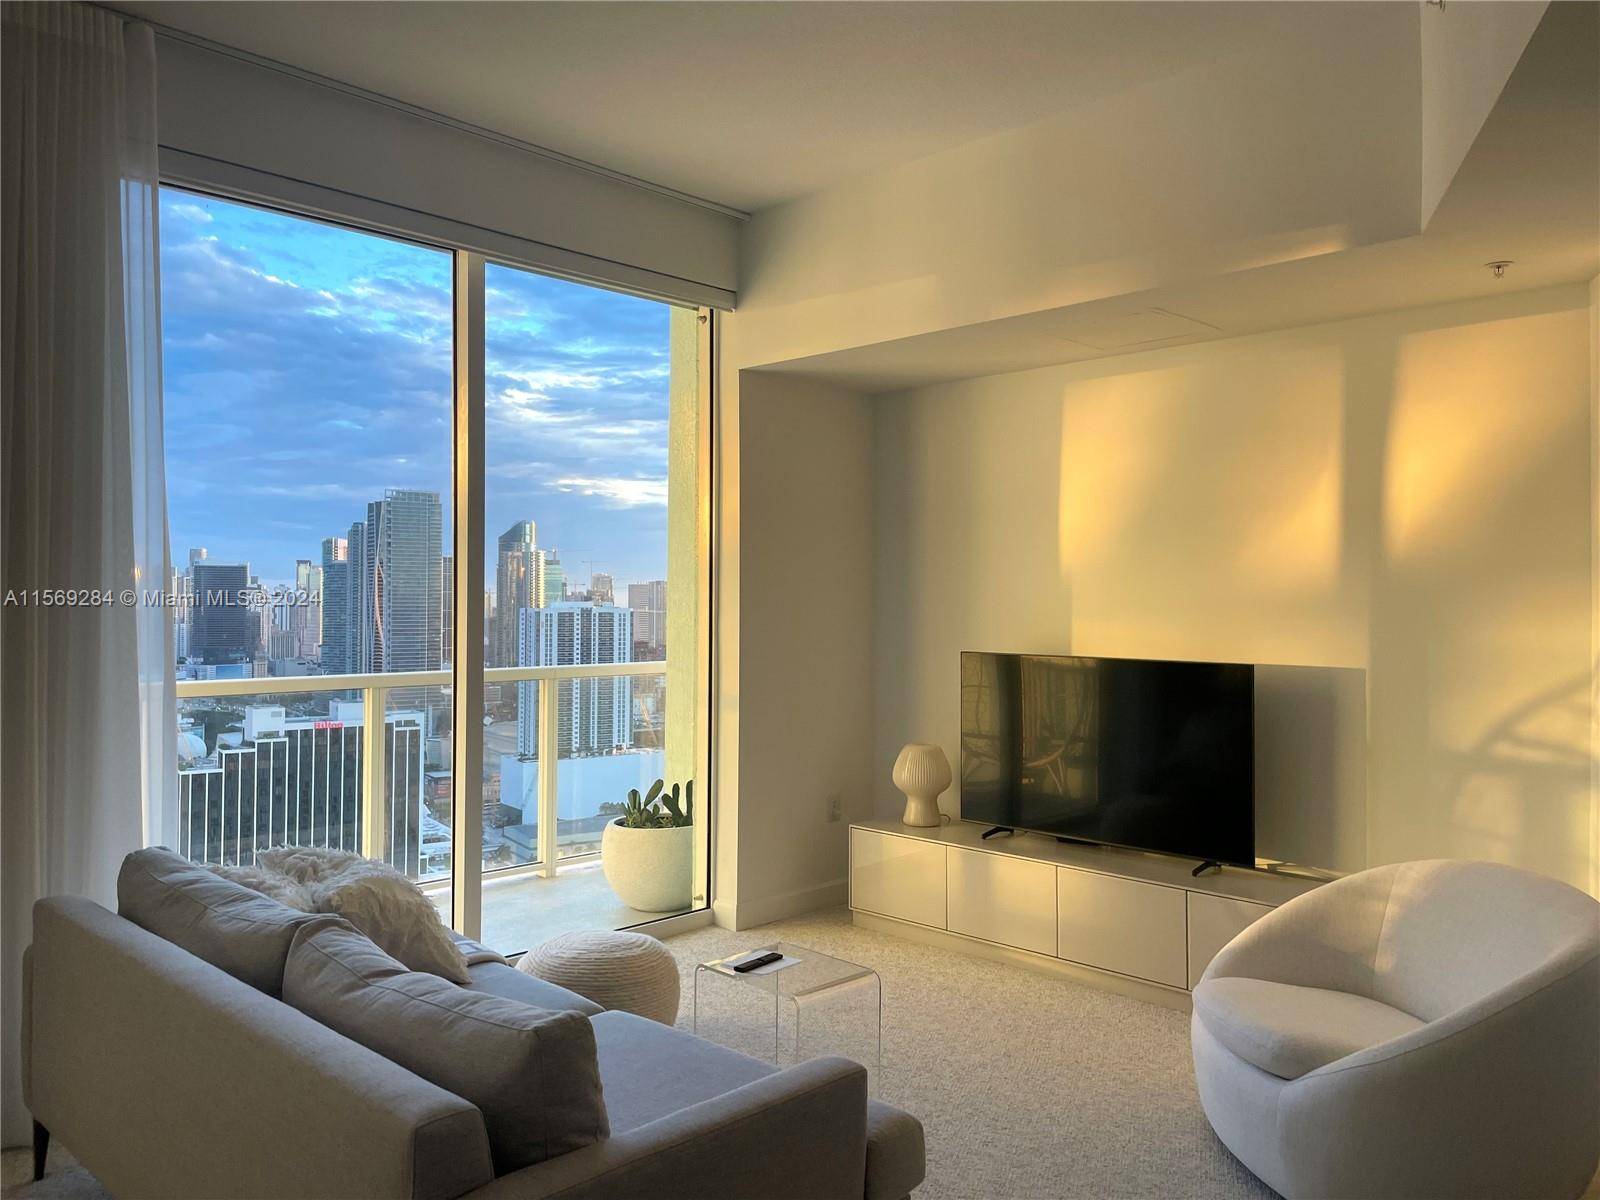 Beautiful light filled high floor condo with amazing downtown views.